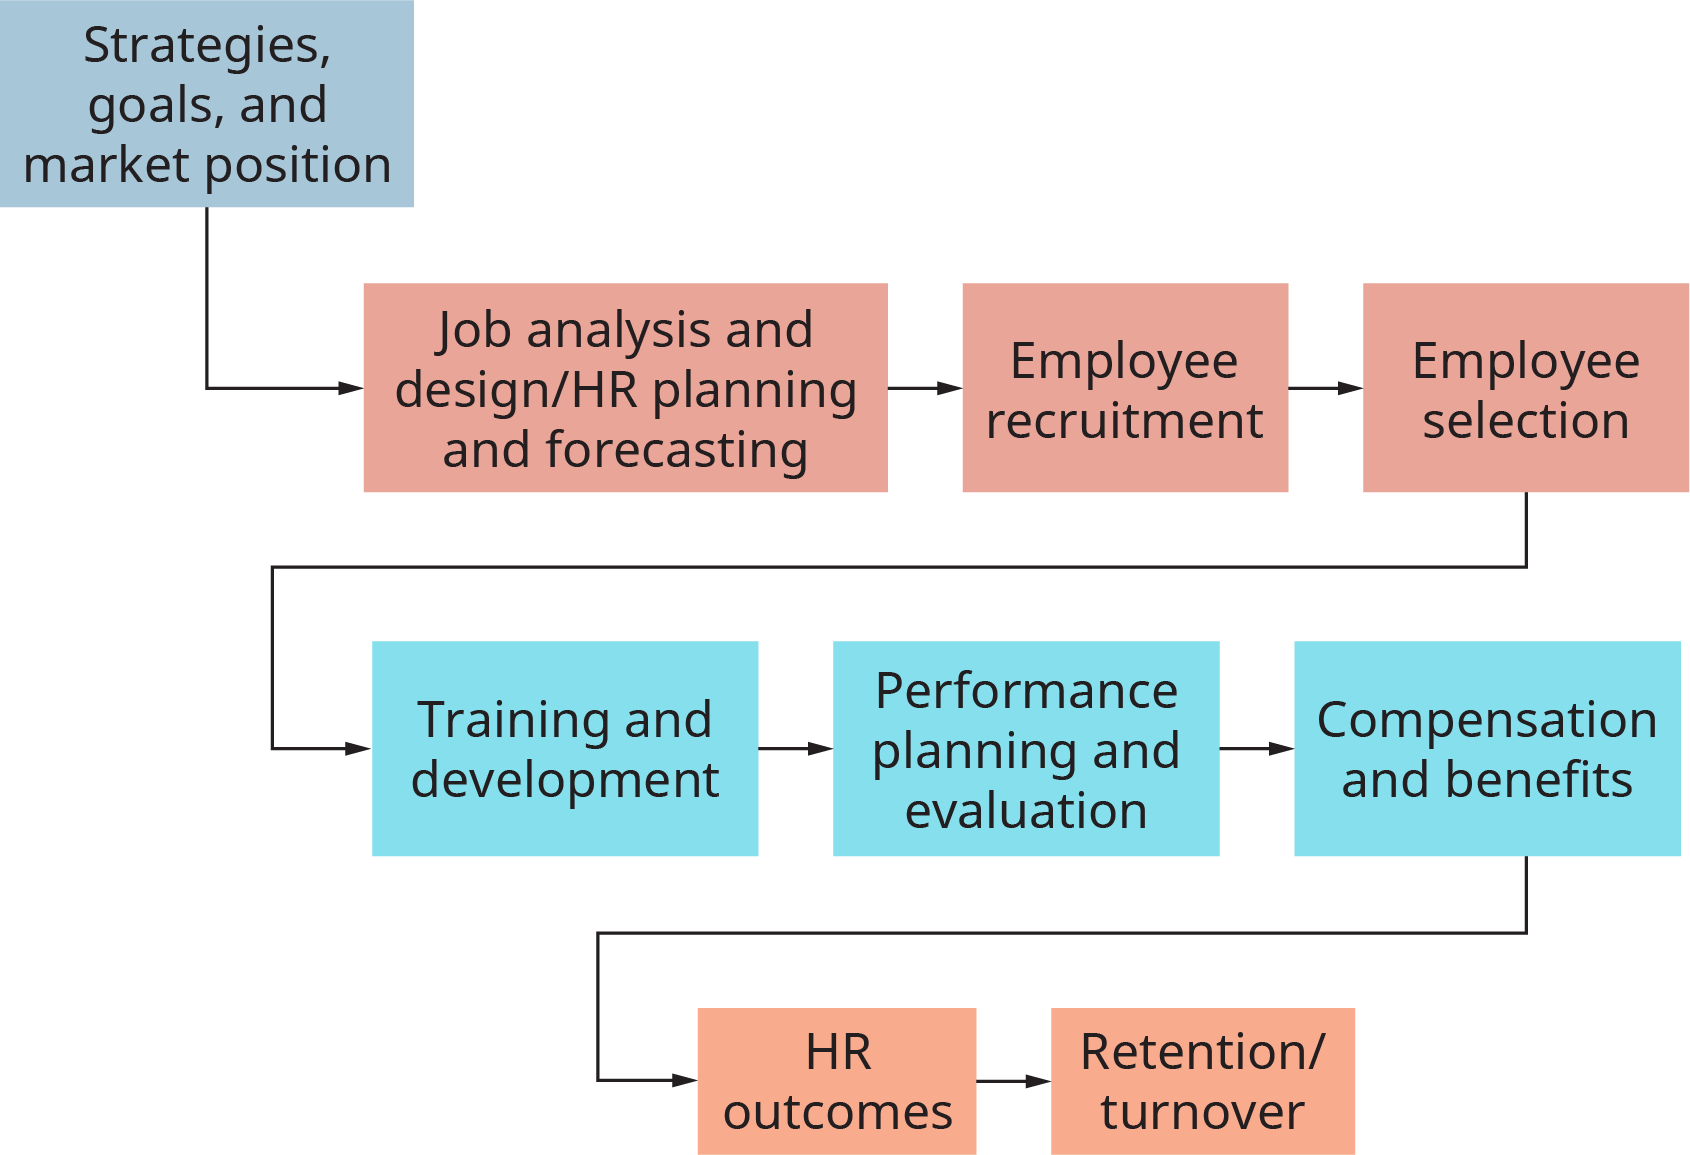 The chart starts with a box labeled strategies, goals, and market position. This flows into a box labeled job analysis and design slash h r planning and forecasting. This flows into employee recruitment. This flows into employee selection. This flows into training and development. This flows into performance planning and evaluation. This flows into compensation and benefits. This flows into h r outcomes. This flows into retention slash turnover, which is the last box.